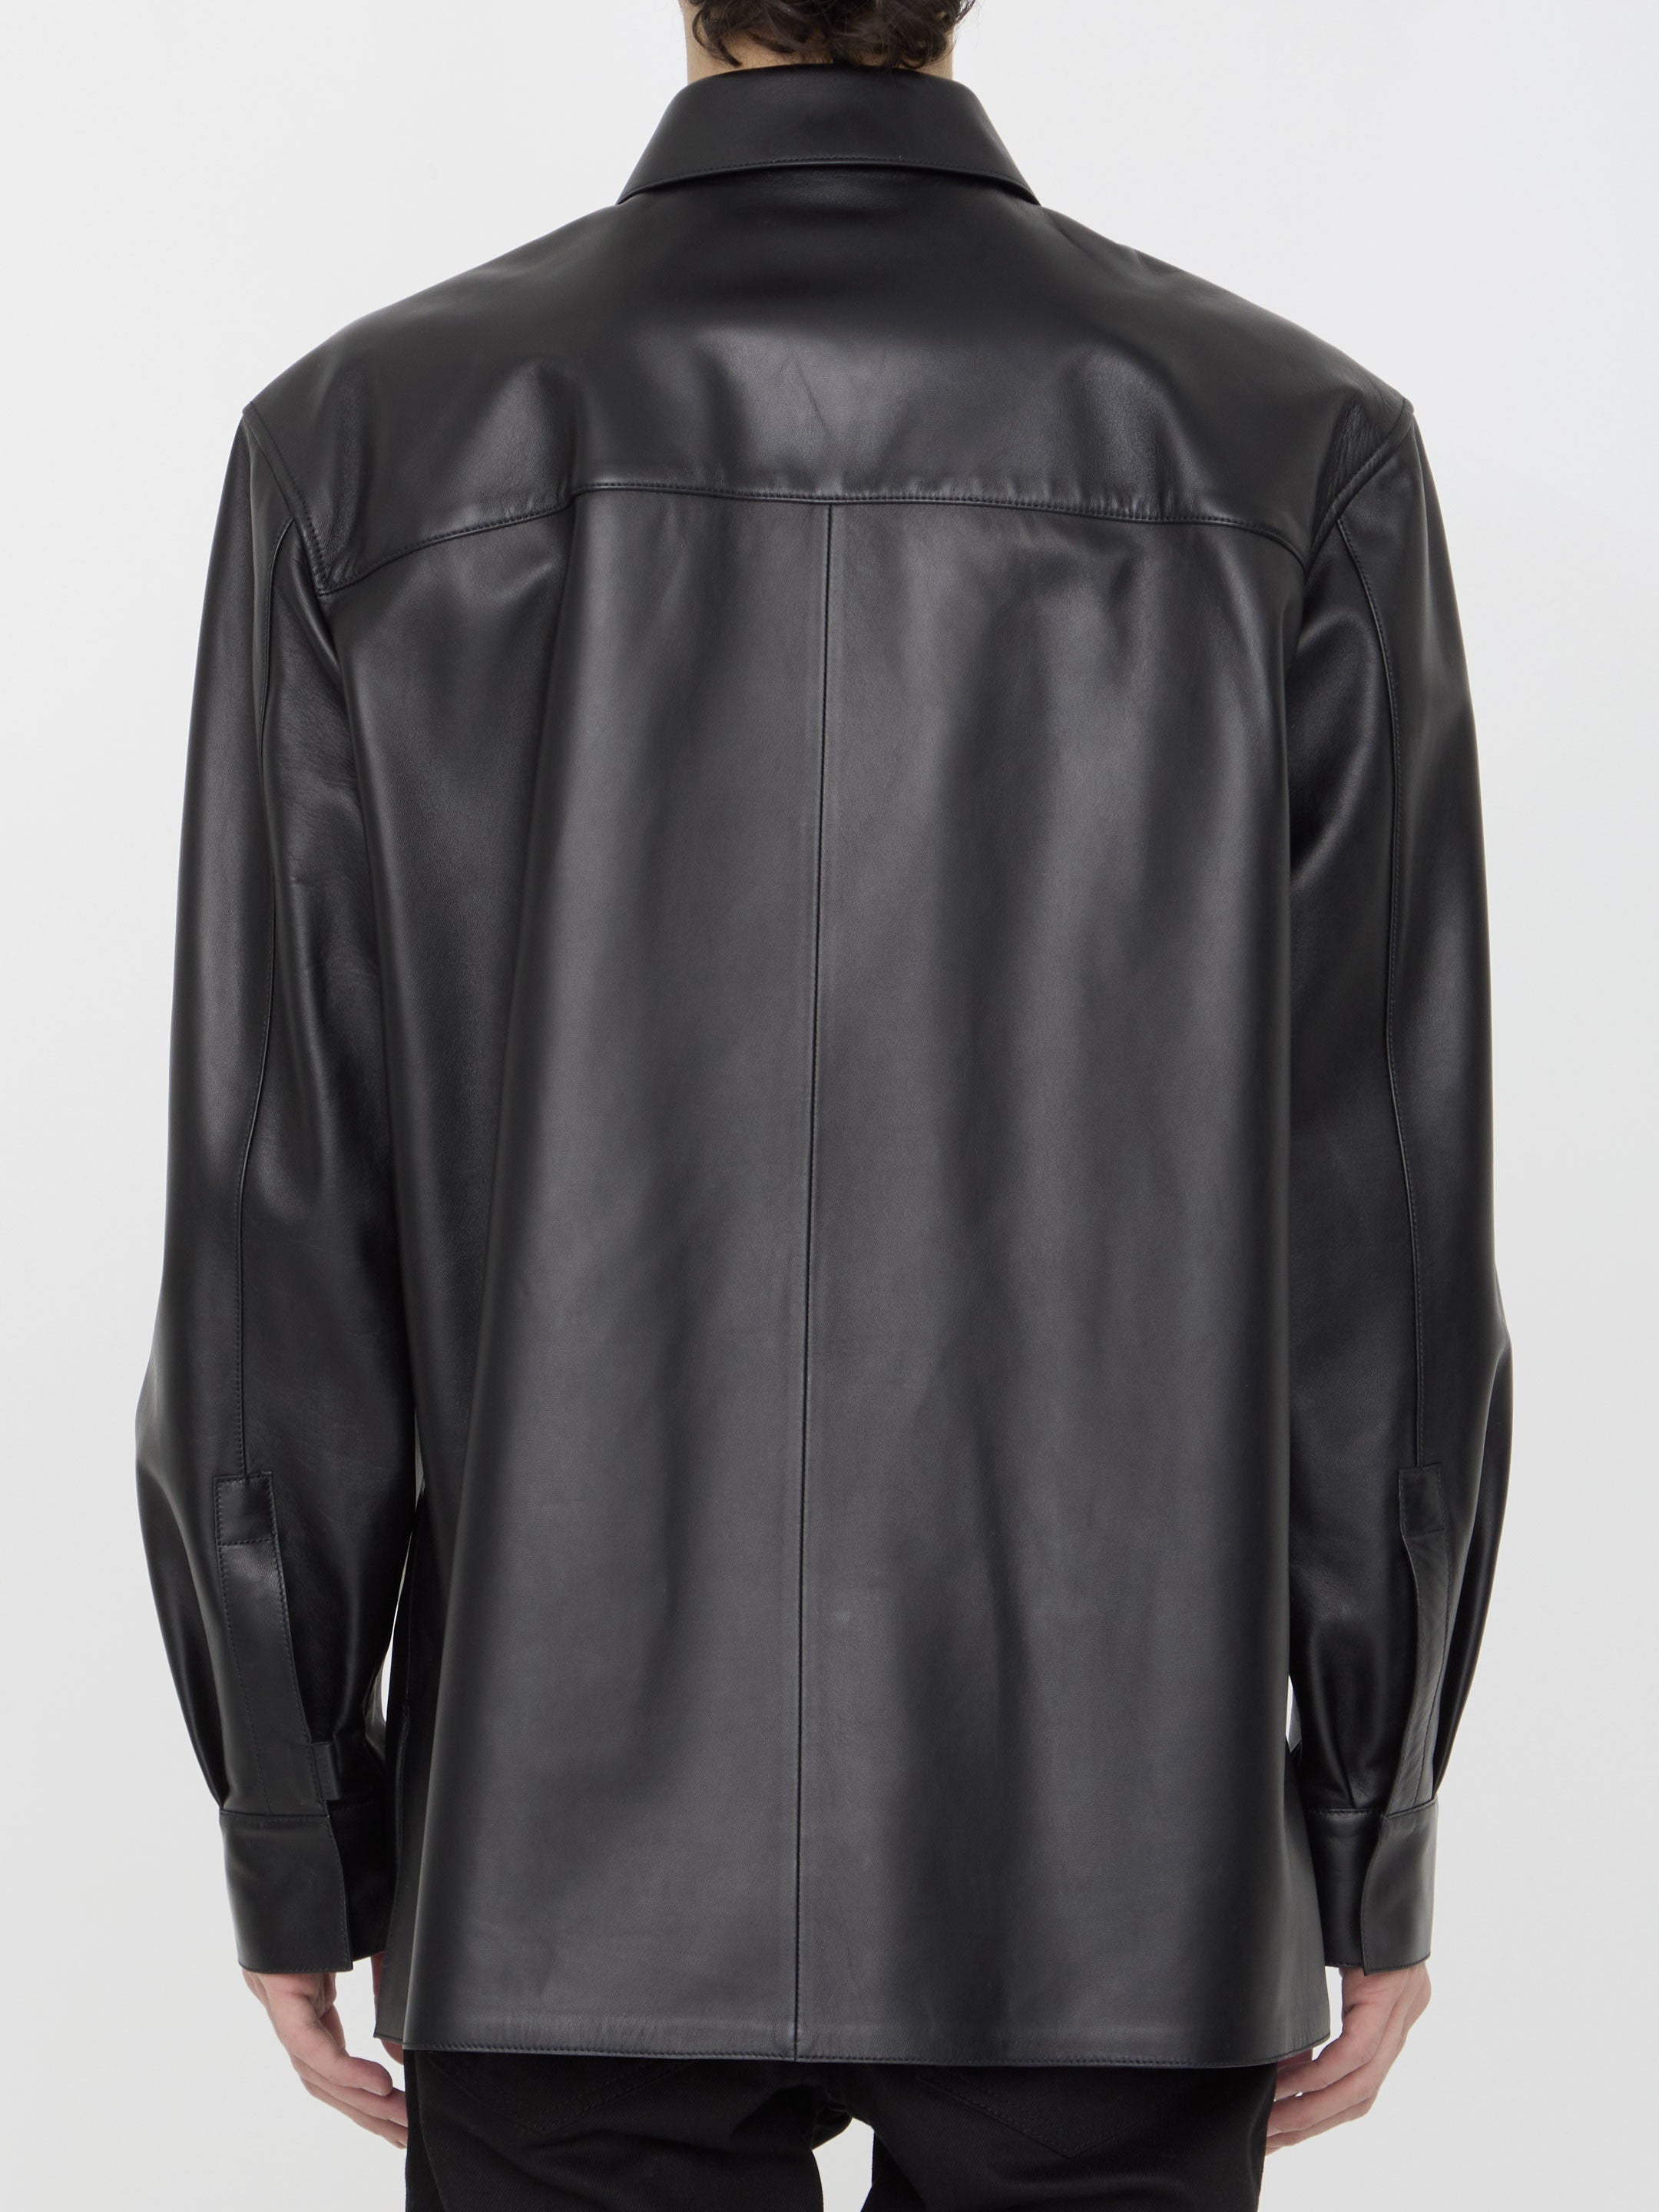 LOEWE-OUTLET-SALE-Leather-overshirt-Shirts-ARCHIVE-COLLECTION-4.jpg